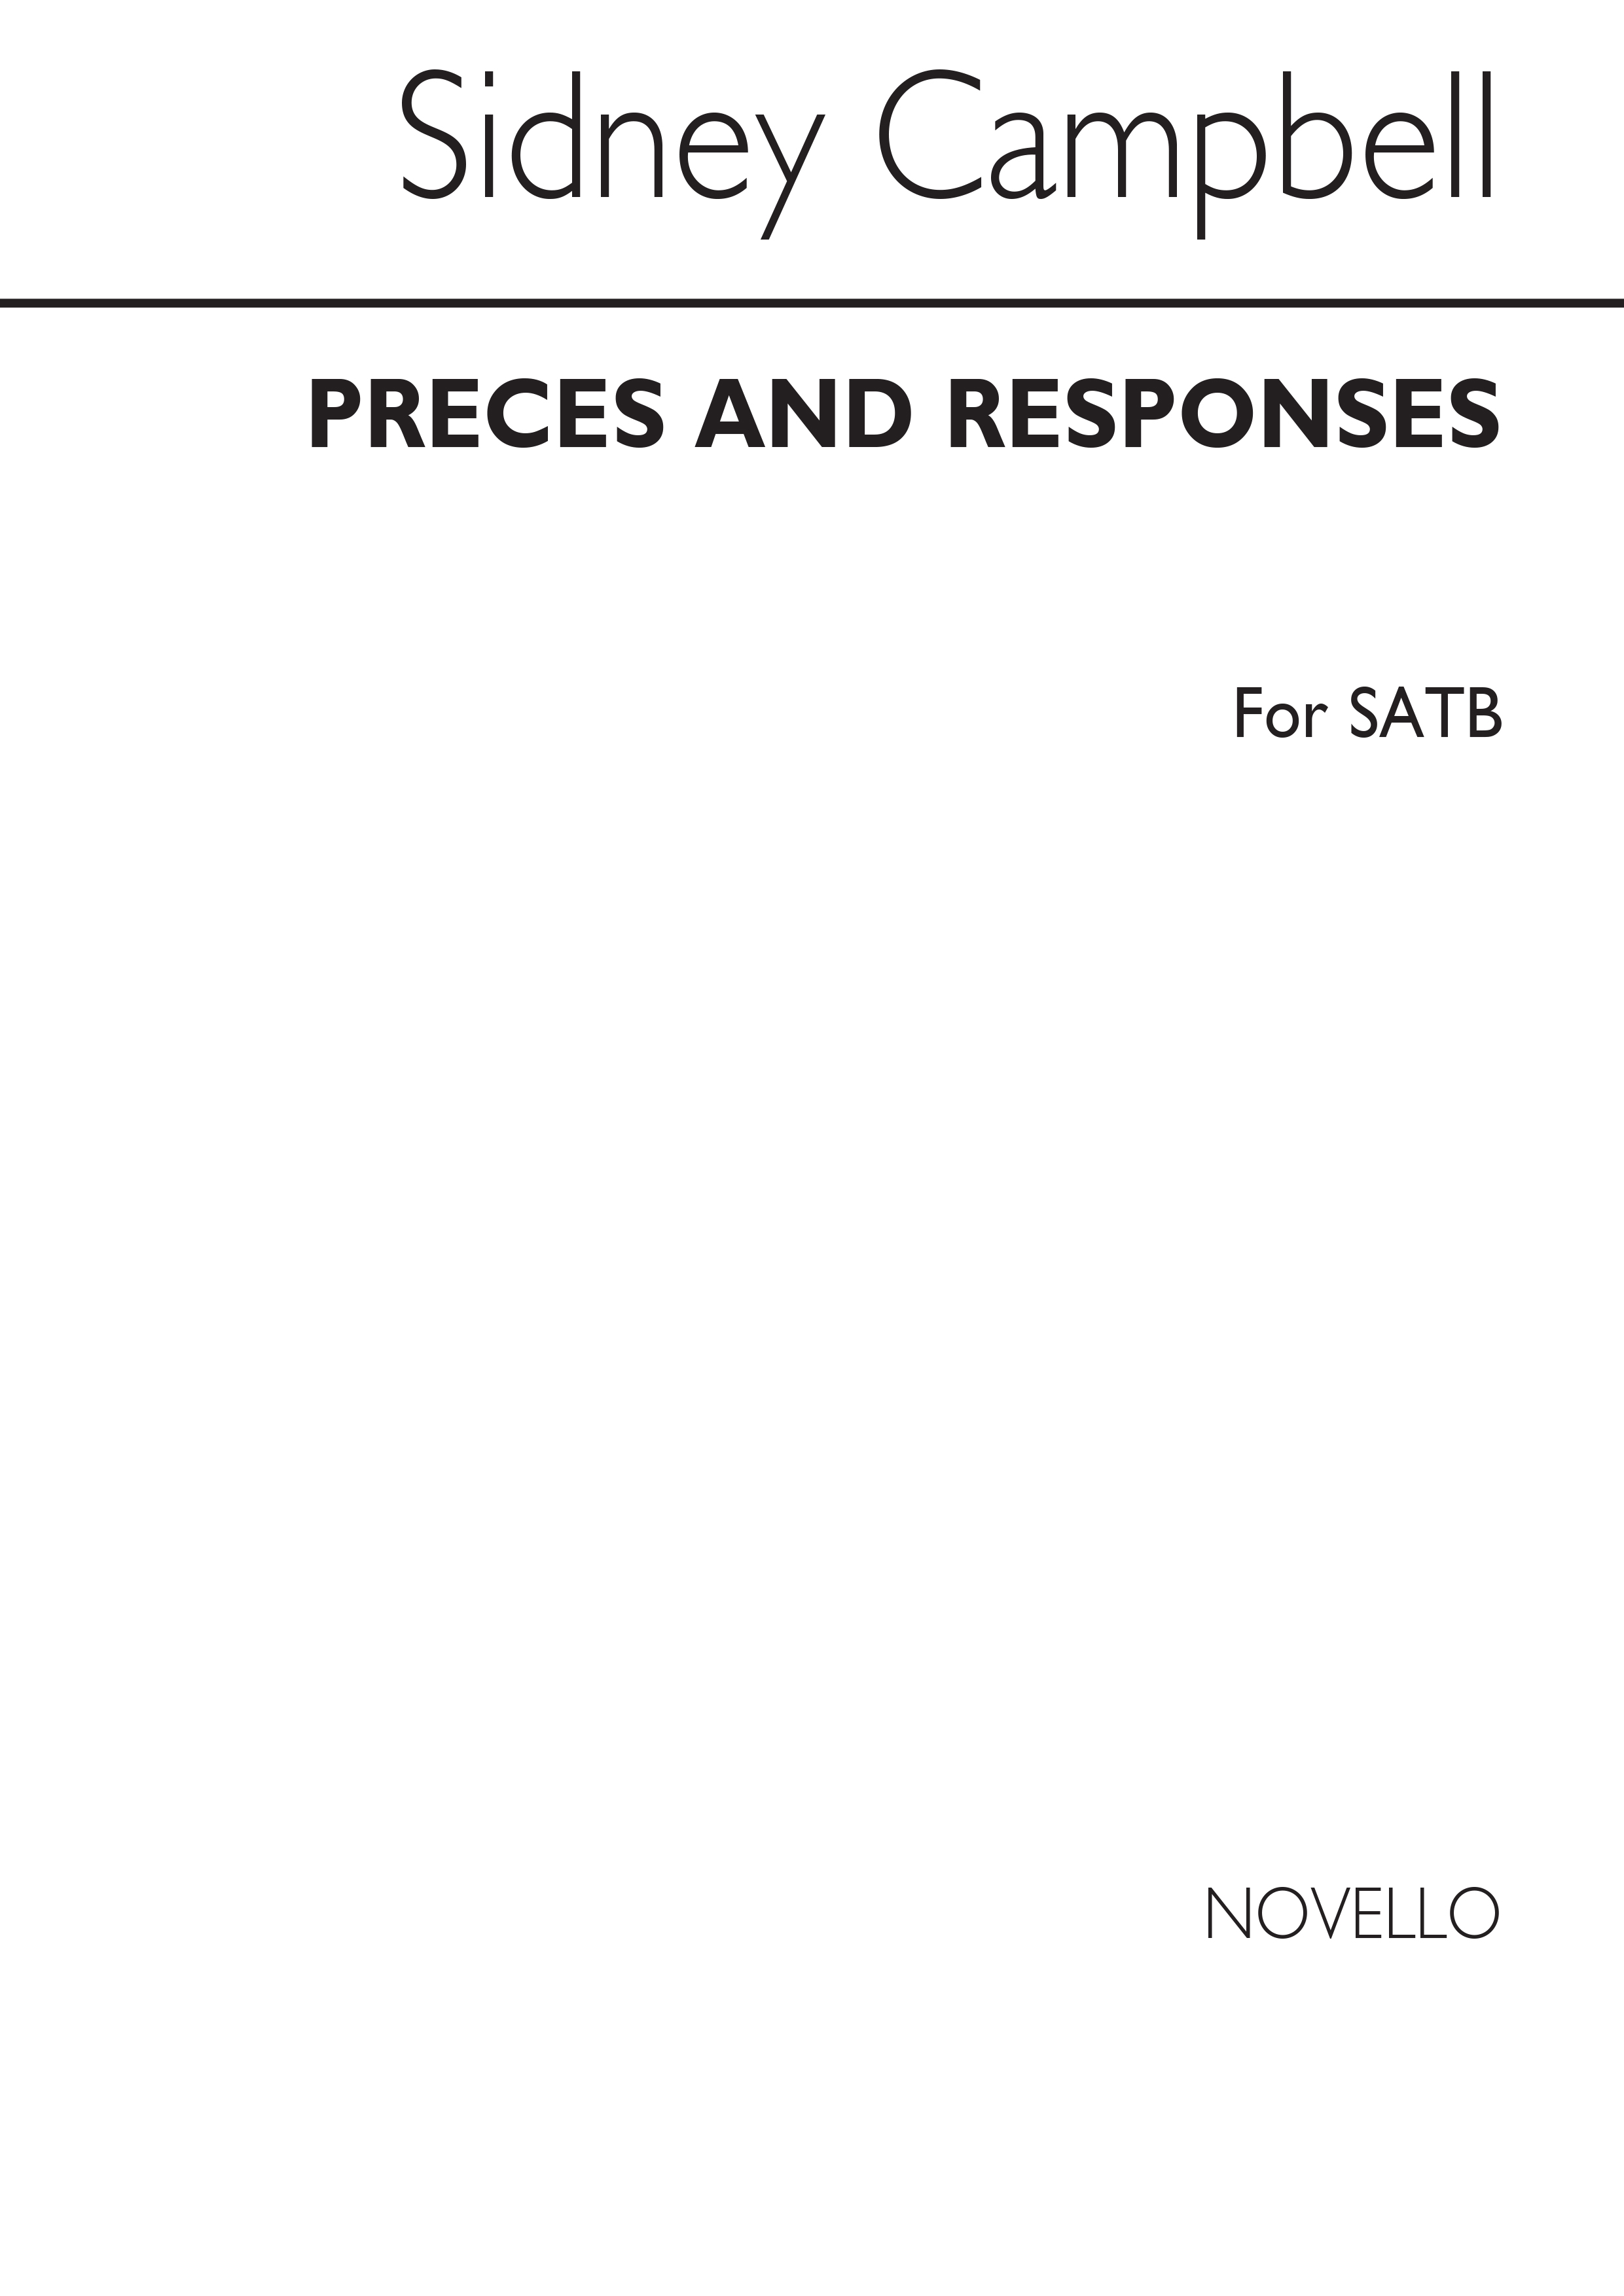 Sidney Campbell: Windsor Preces And Responses for SATB Chorus